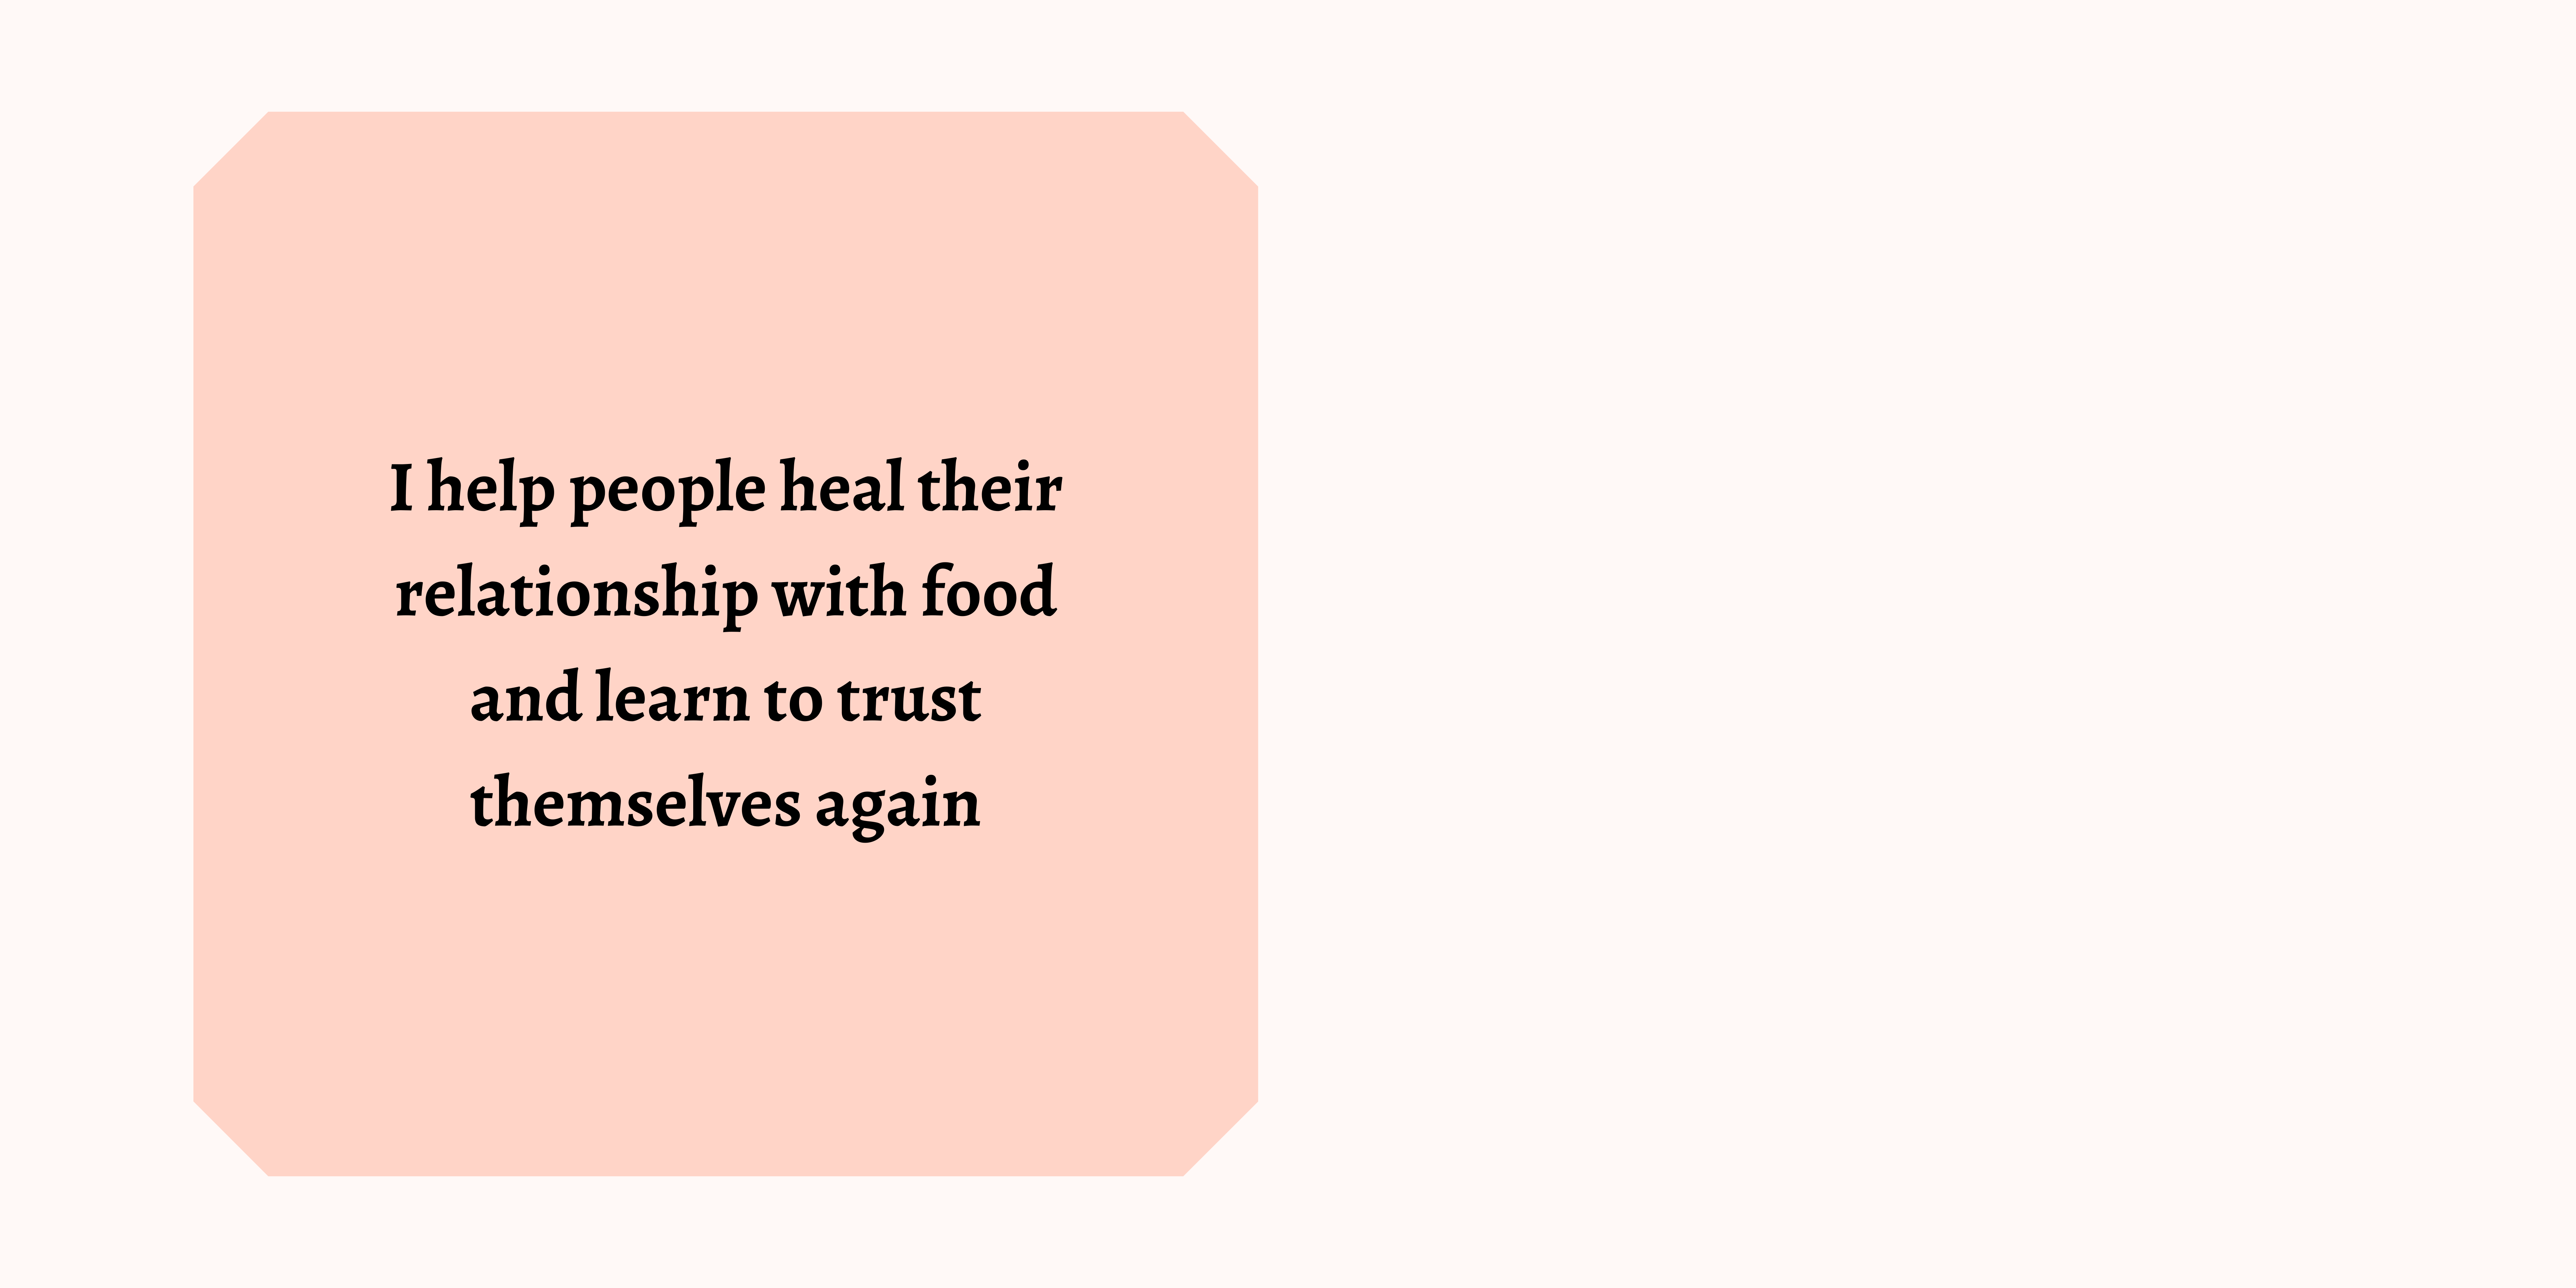 Banner about intuitive eating coaching and mindset coaching with the text "I help people heal their relationship with food and learn to trust themselves again"